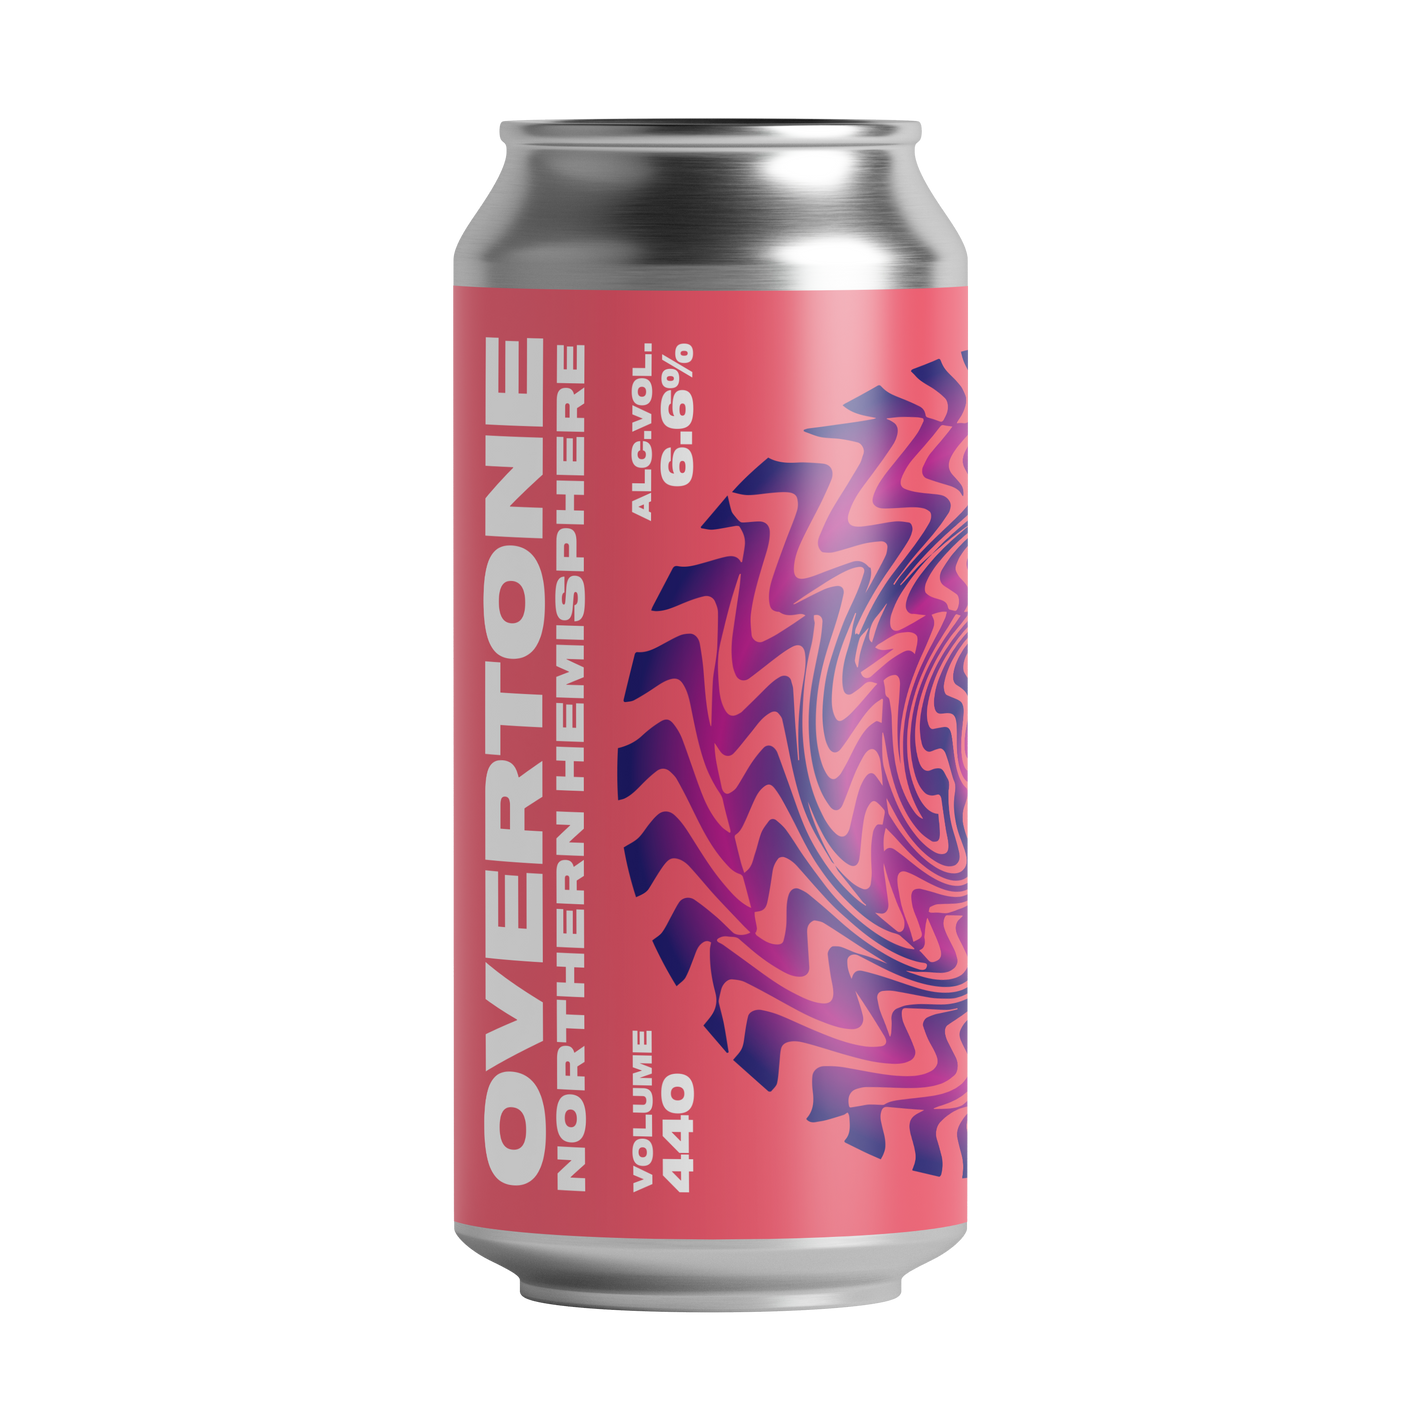 Overtone Brewing Co.